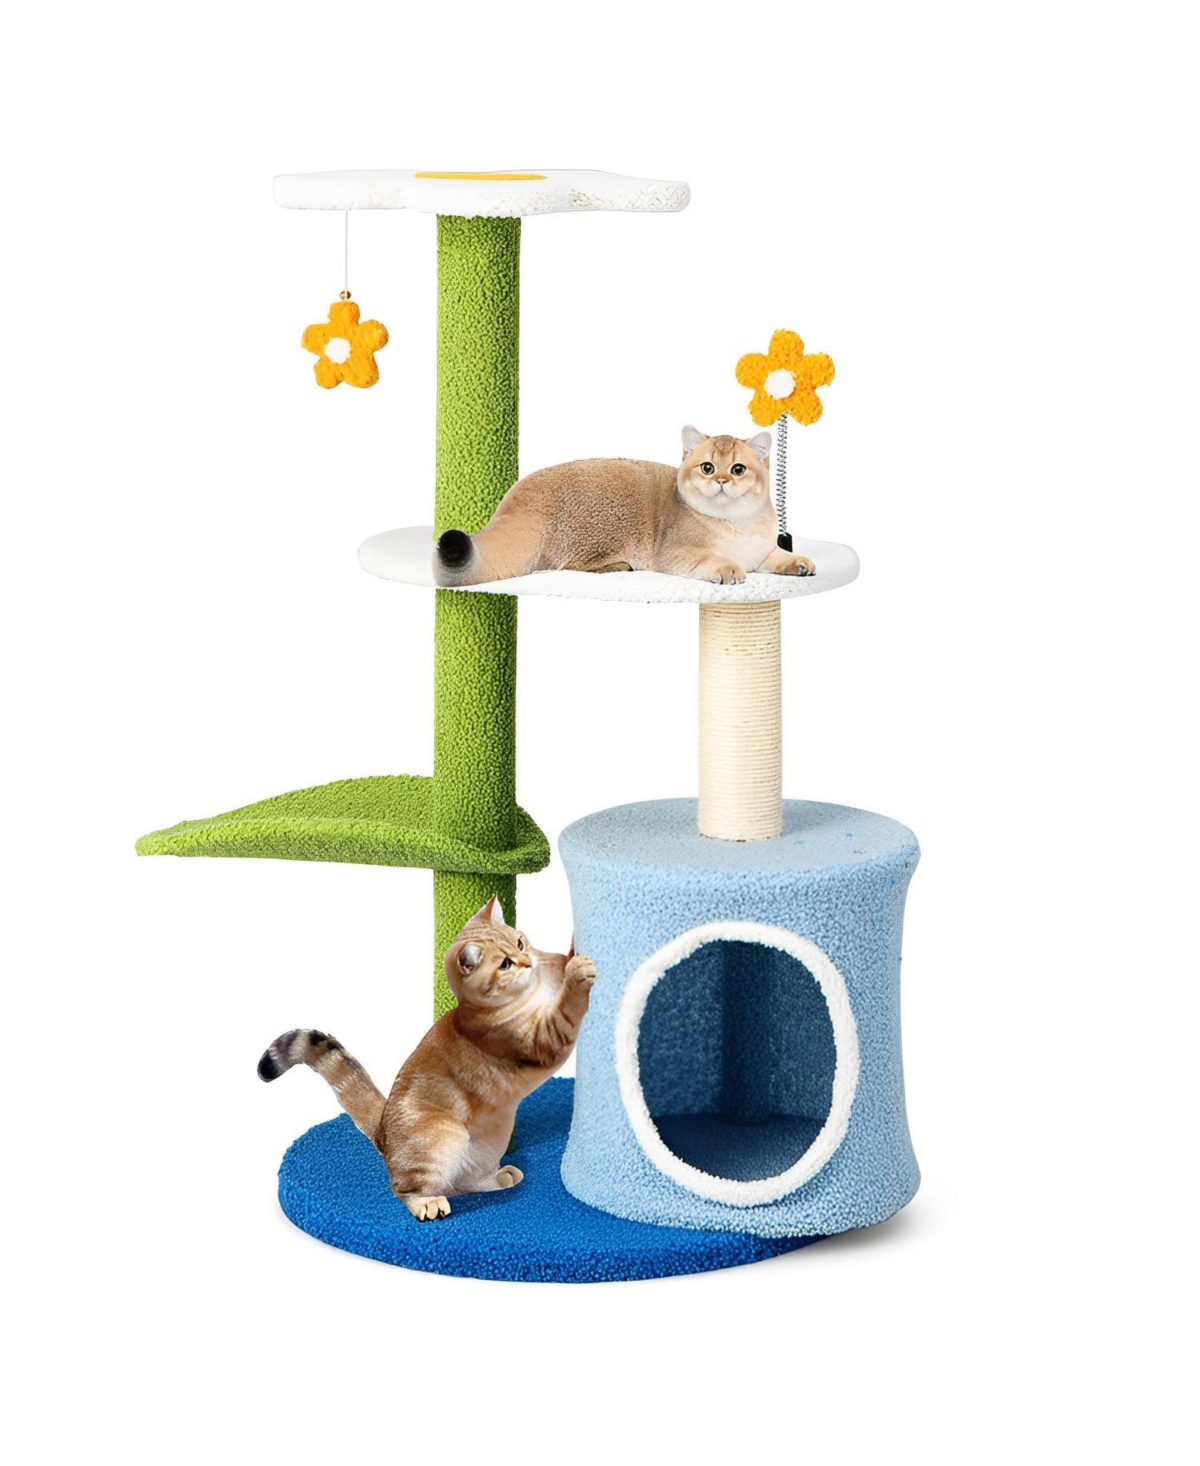 34.5 Inch 4-Tier Cute Cat Tree with Jingling Balls and Condo - Blue